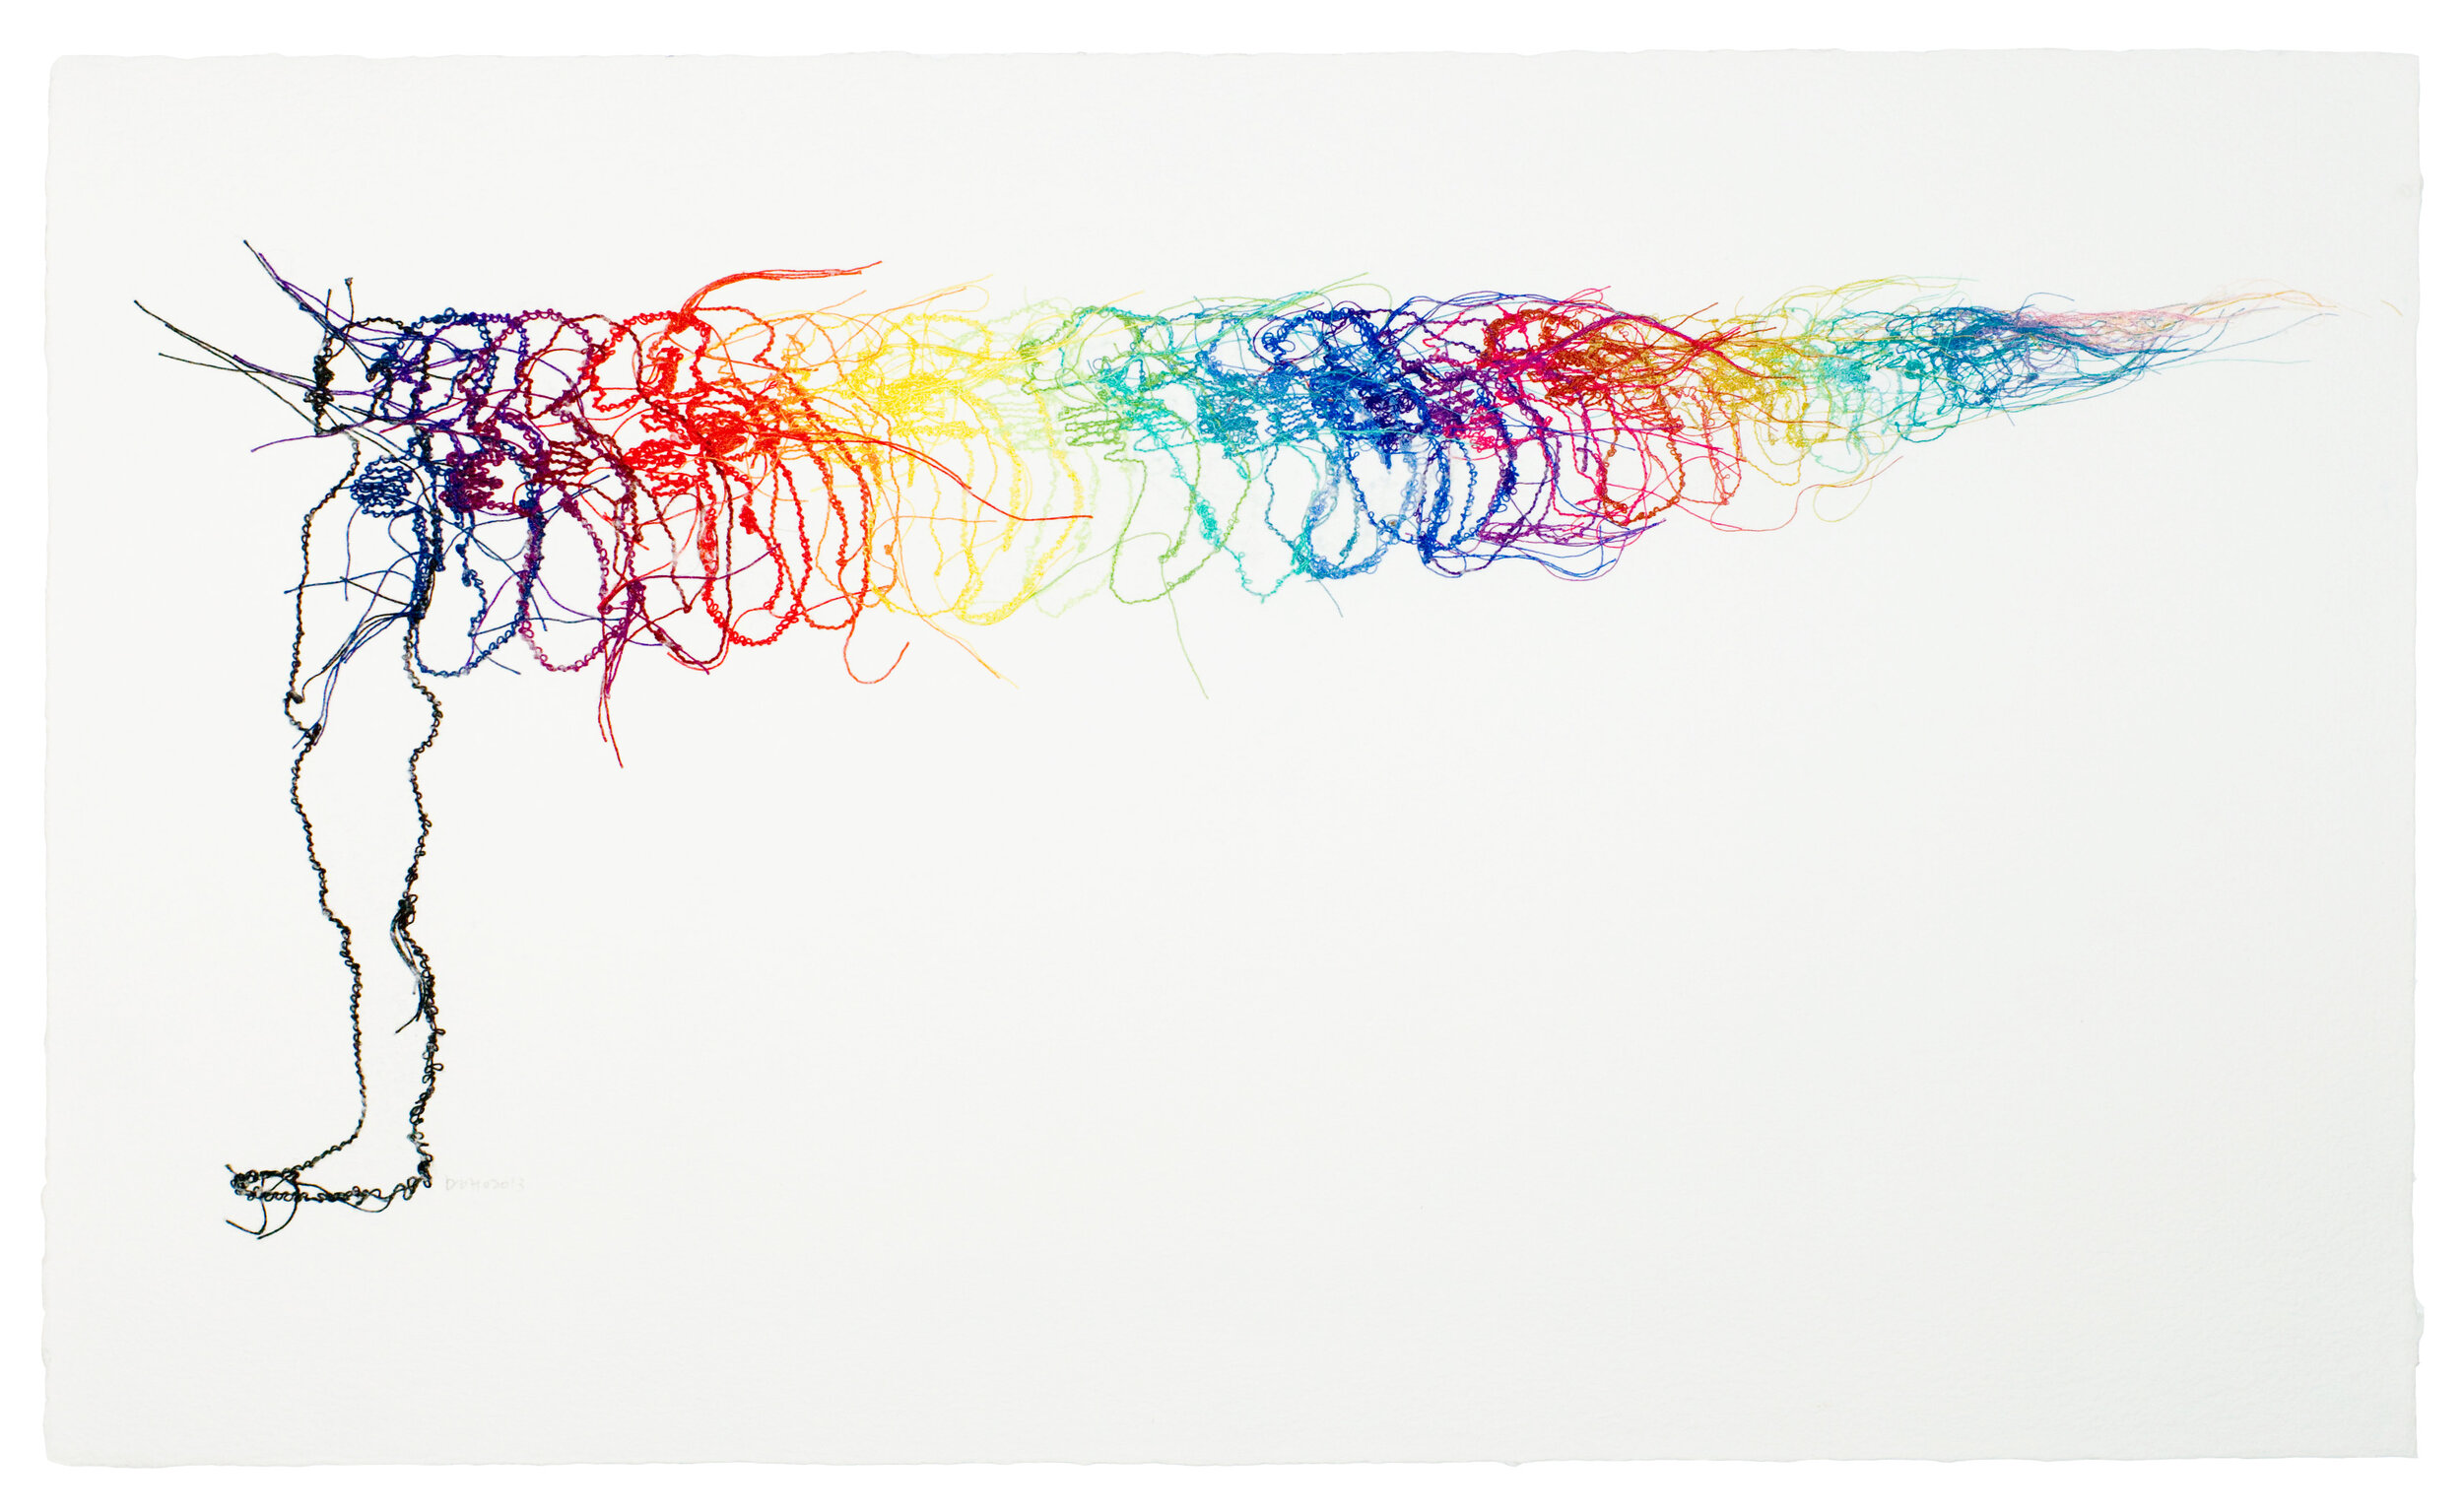  Do Ho Suh,  Whispers,  2013, Thread, cotton, methyl cellulose, 20.625 x 30.25 x .5 inches. 